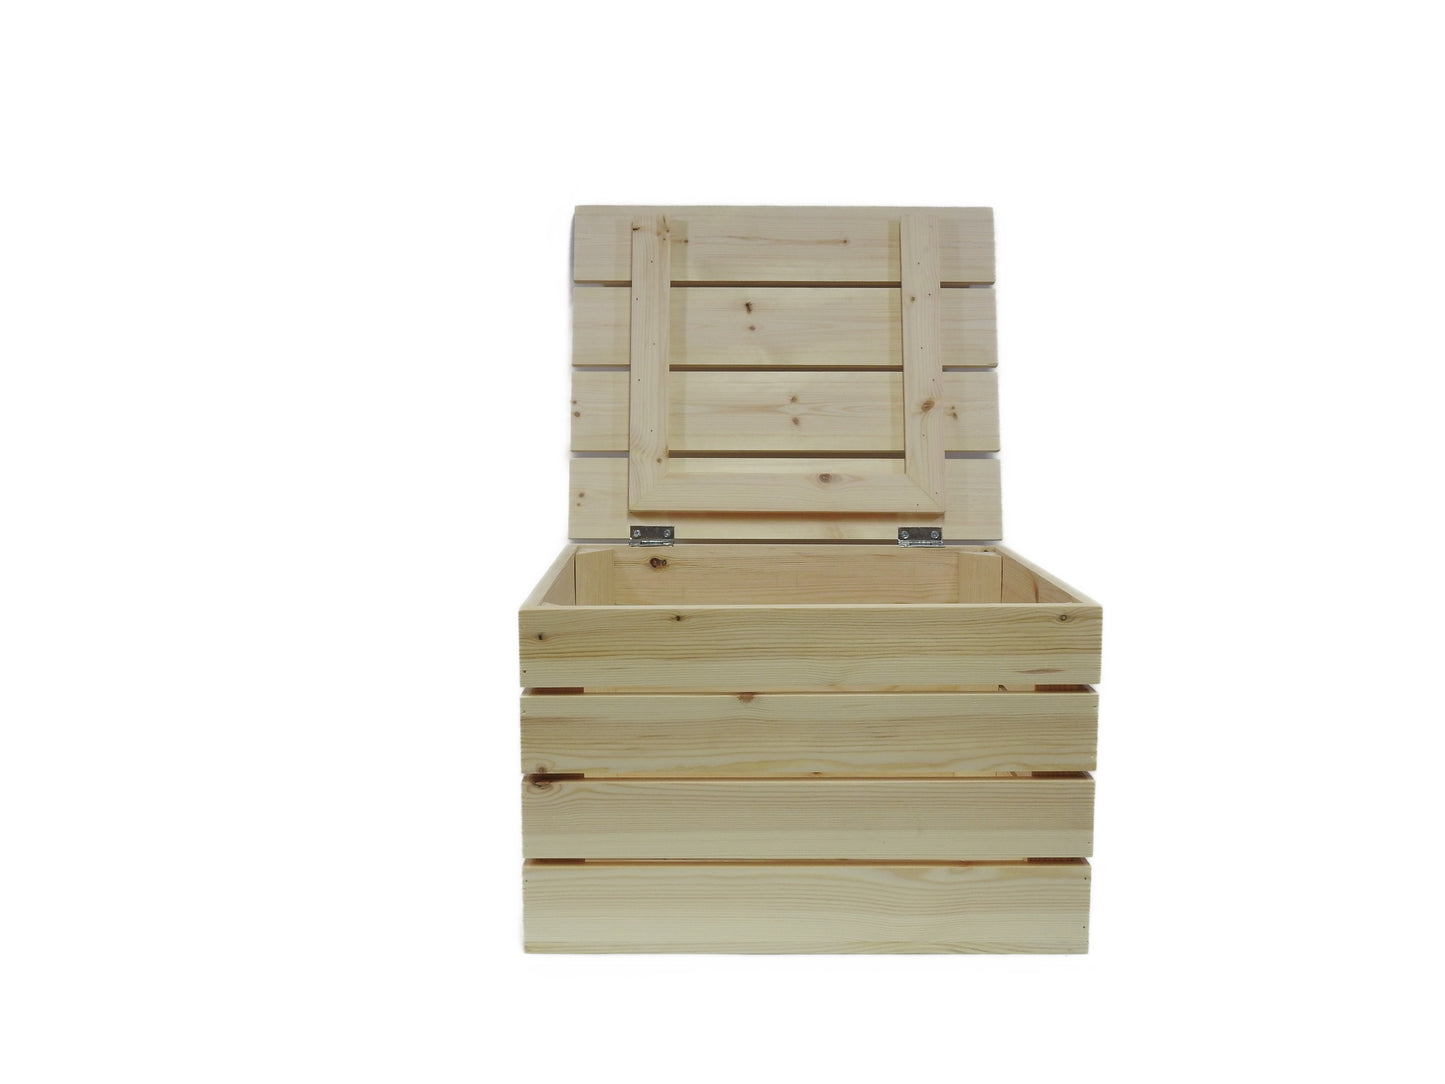 Apple Crates with POS slot in Lid